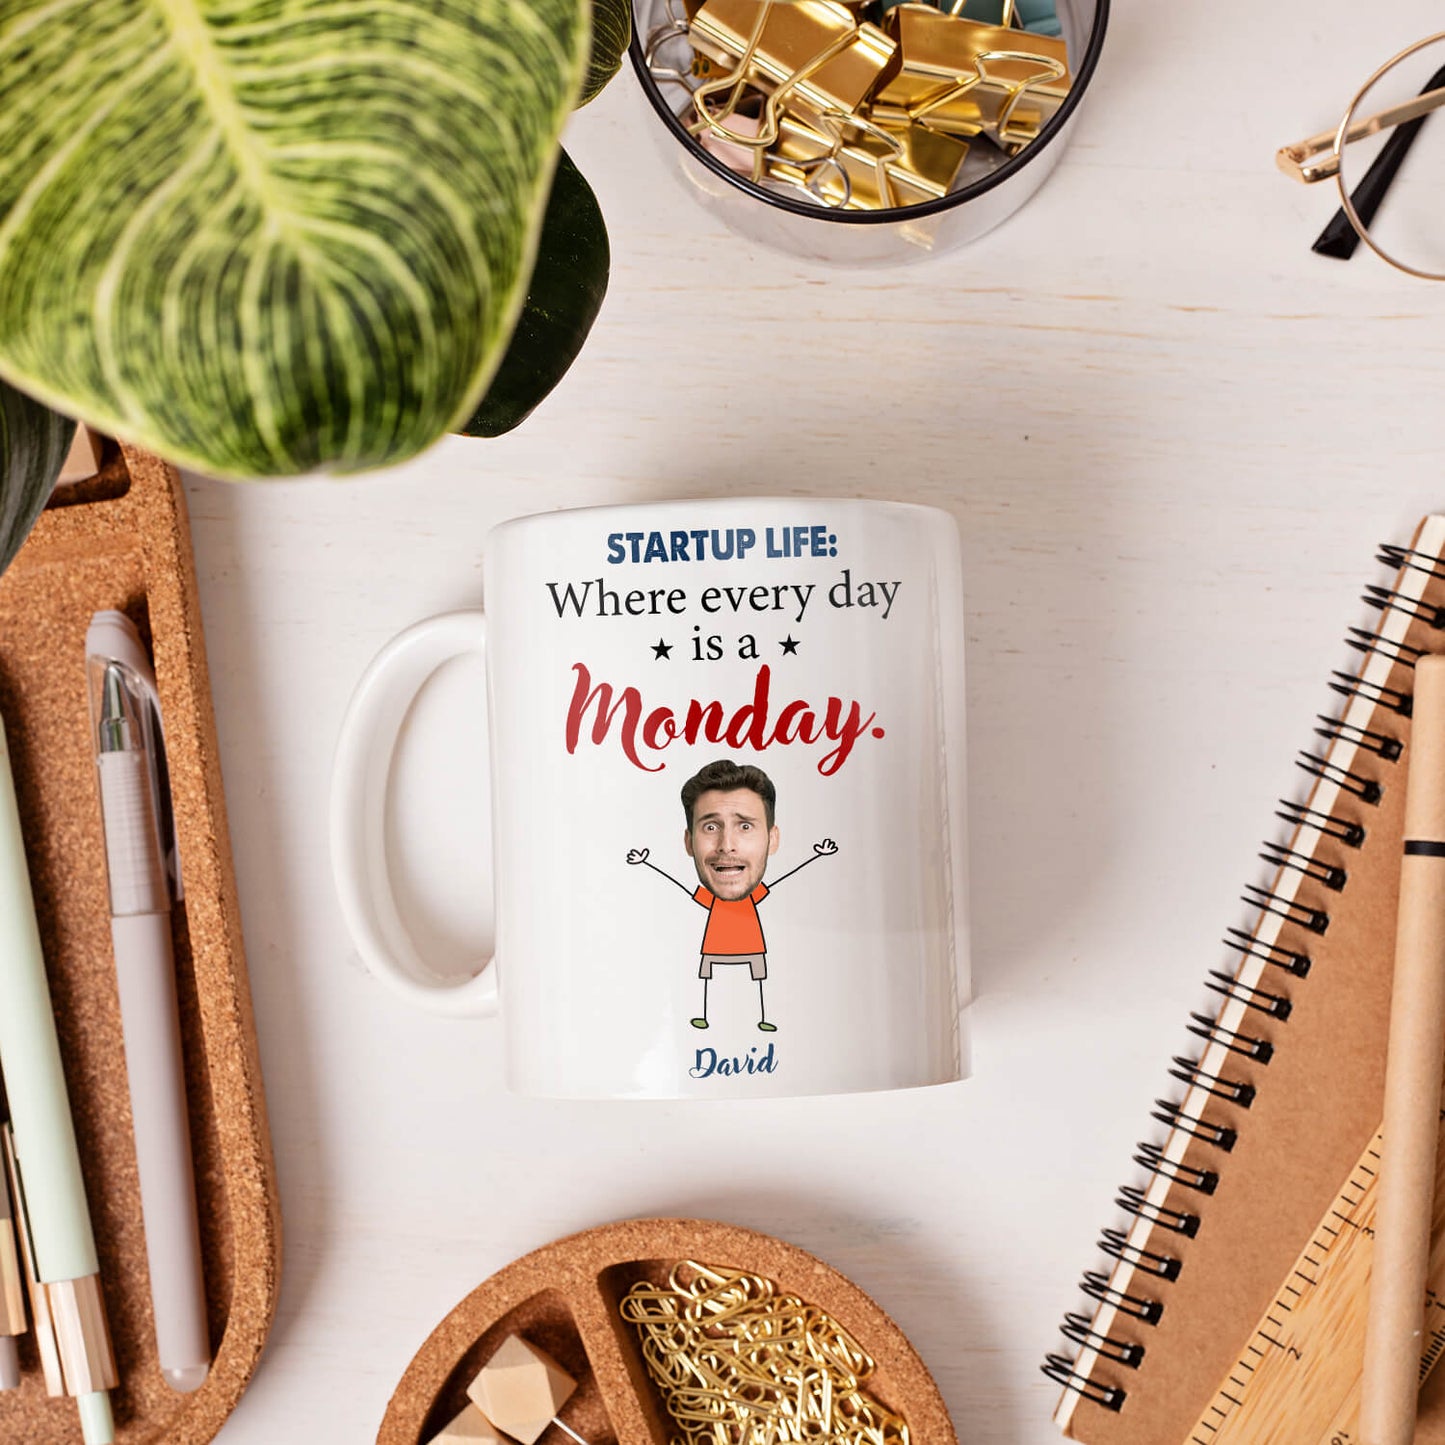 Startup life: Where every day is a Monday. - Personalized Birthday gift for Startup Founder - Custom Mug - MyMindfulGifts